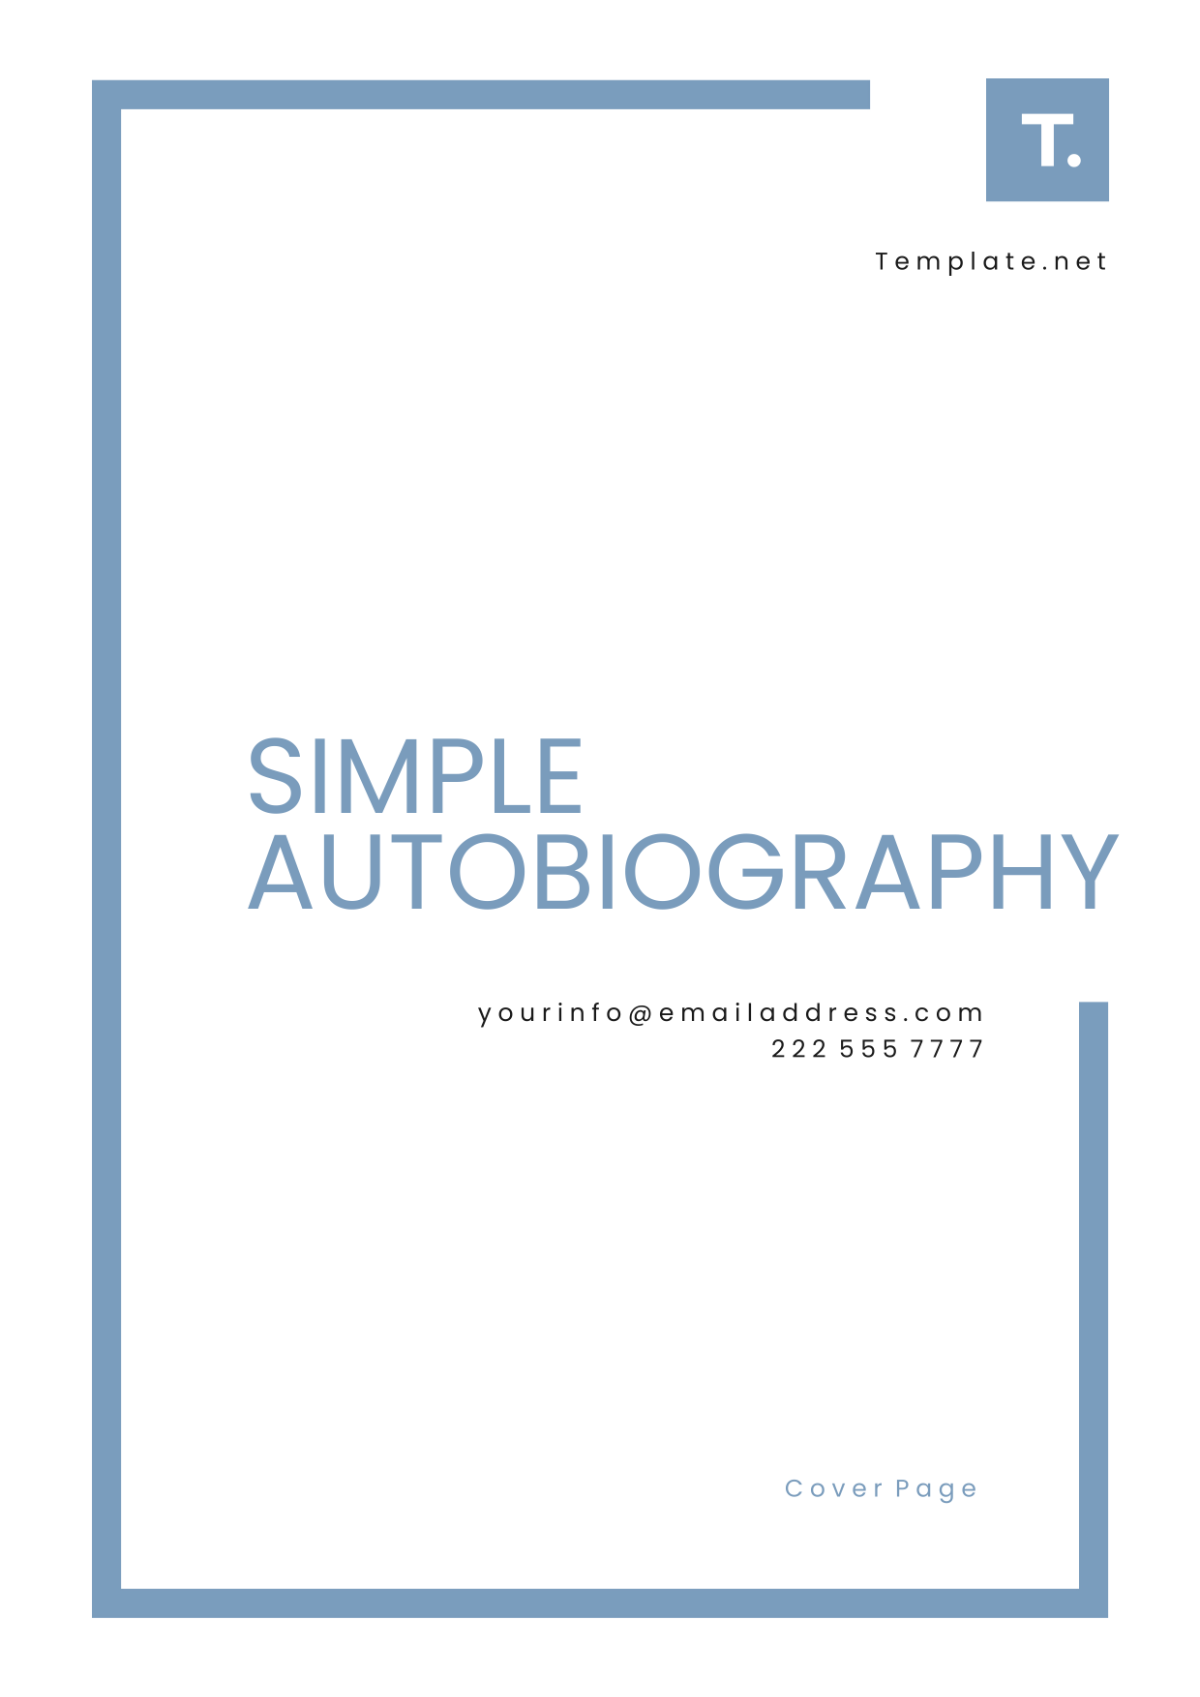 Free Simple Autobiography Cover Page Template